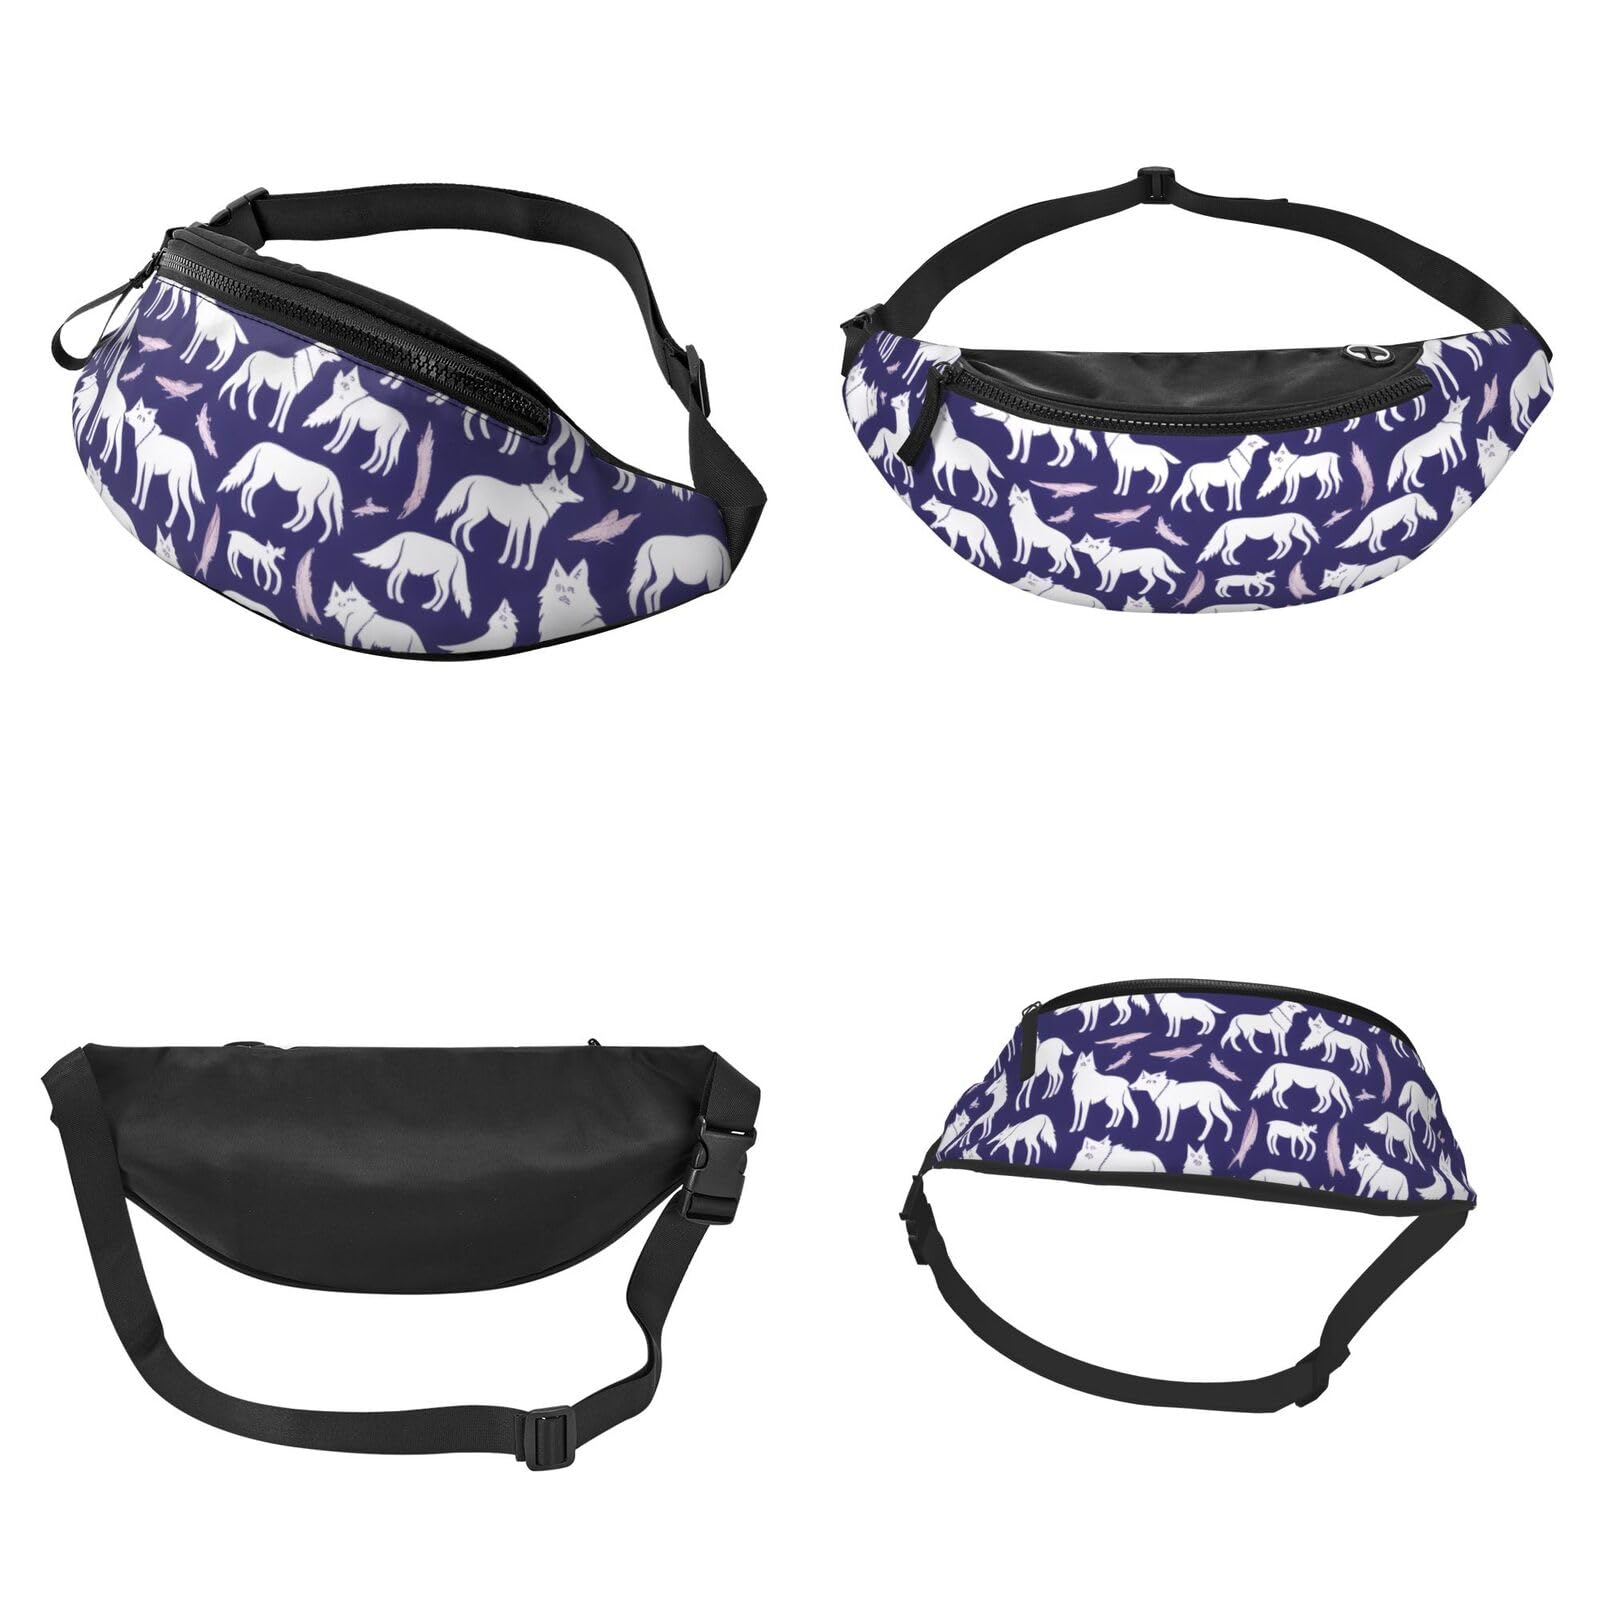 Wolf Pattern Fanny Pack For Women And Men Fashion Waist Bag With Adjustable Strap For Hiking Running Cycling